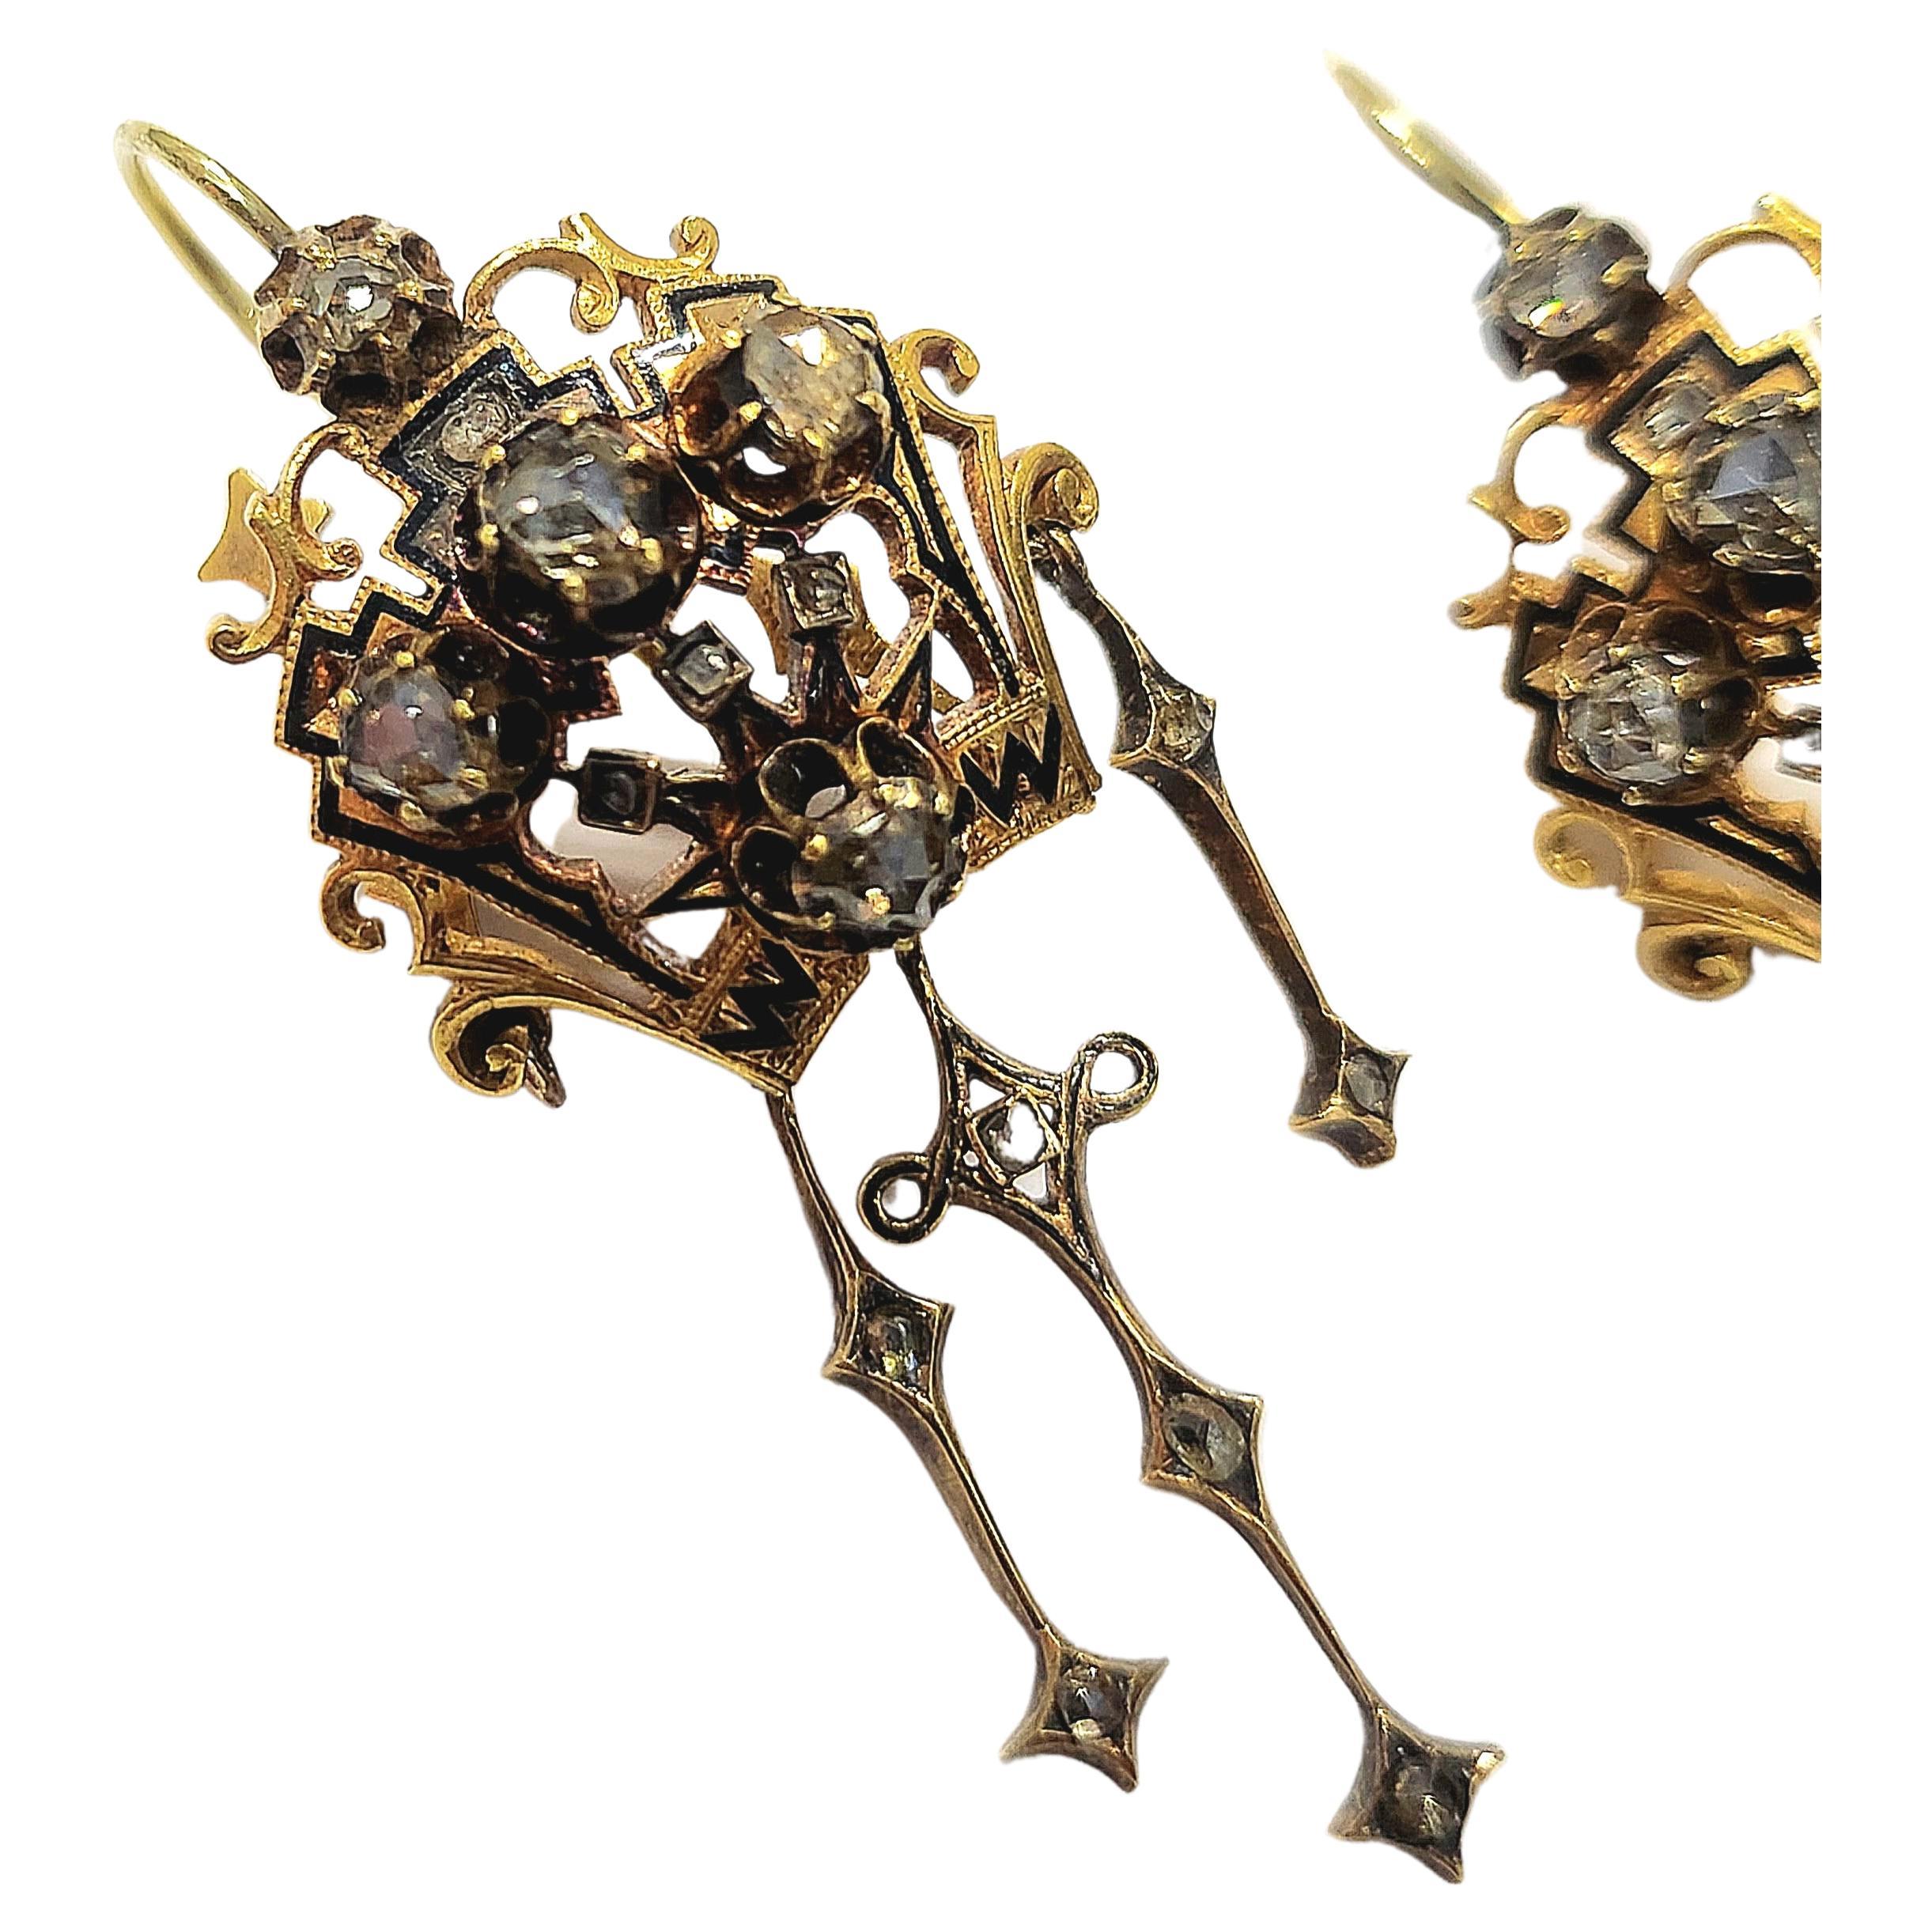 Victorian era long dangling gold earrings with rose cut diamonds estimate weight 2 carats and black enamel earrings dates back to 1850.c 